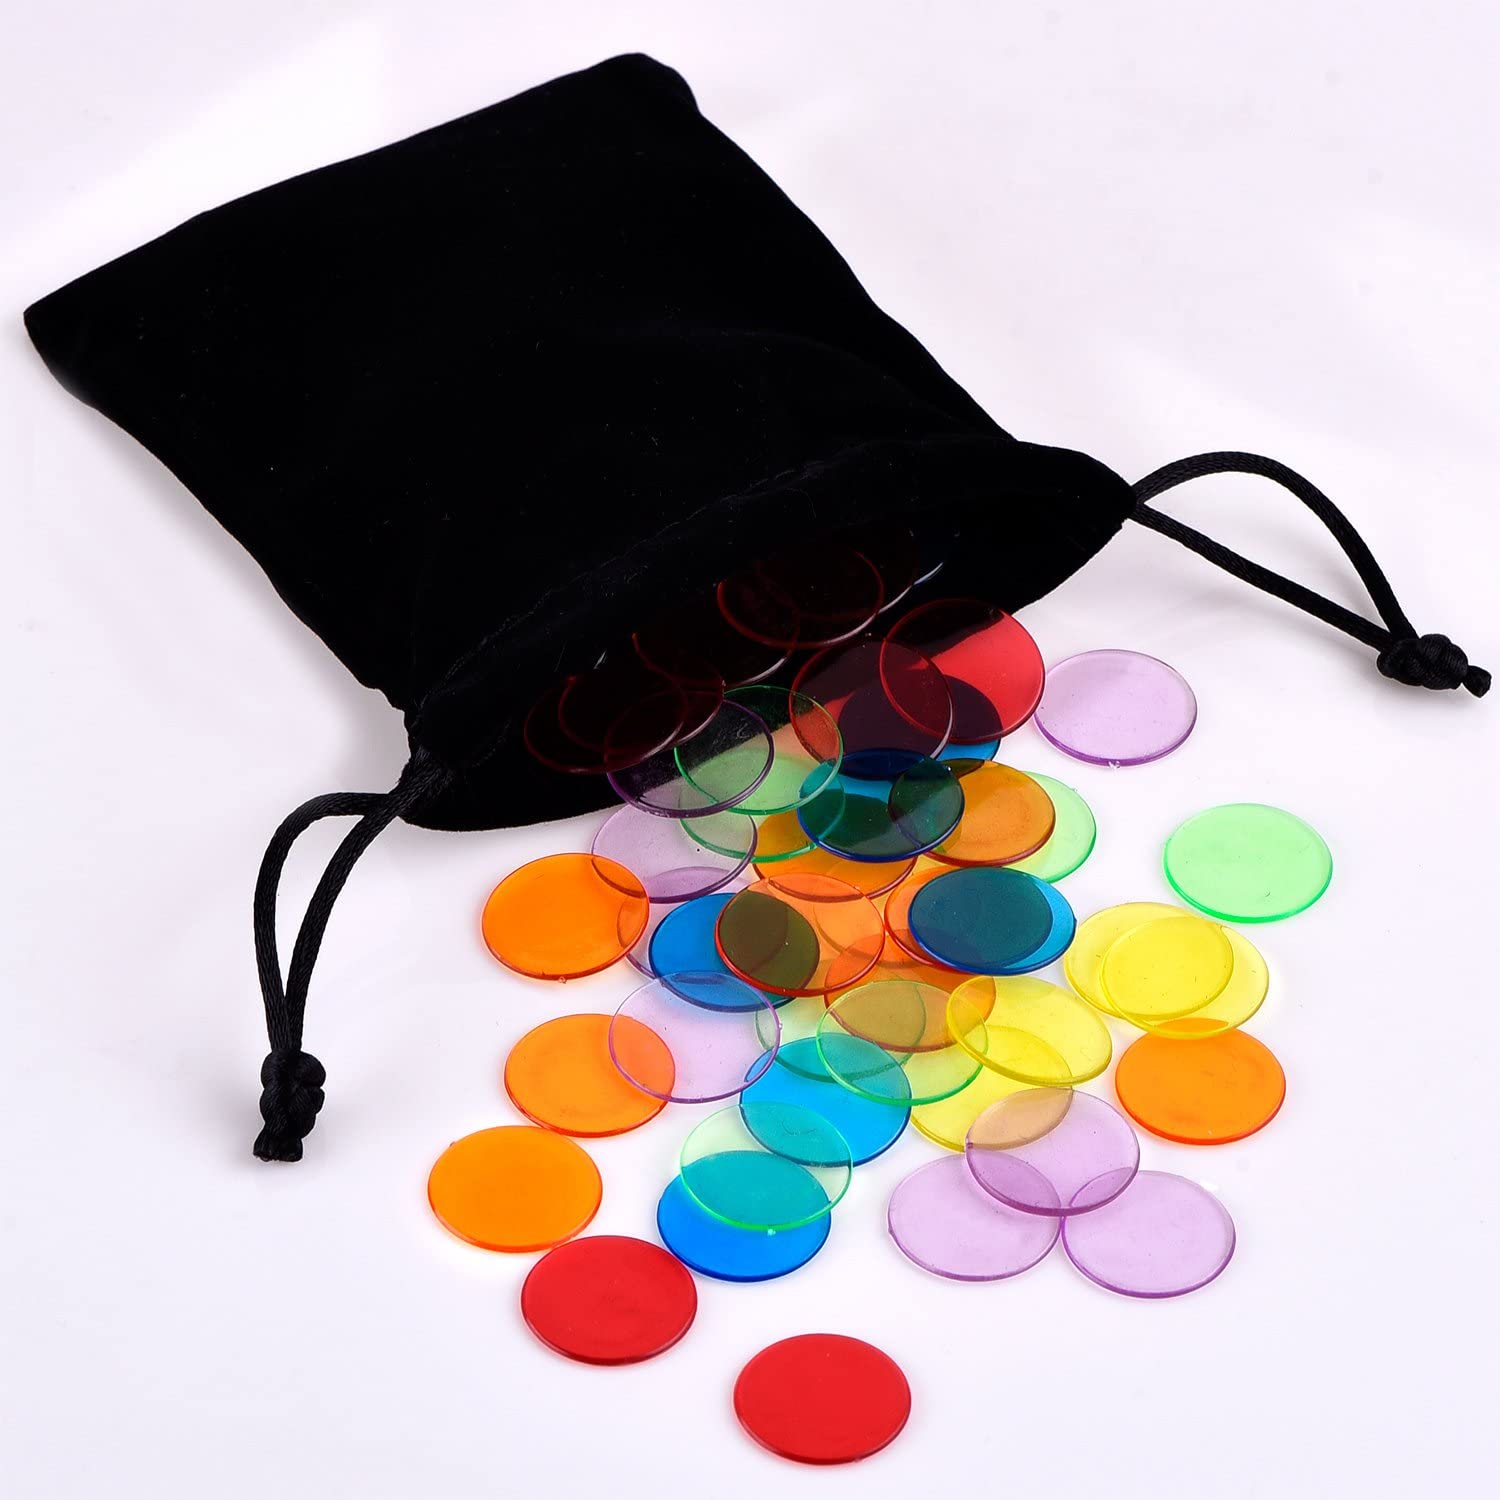 120 Pieces Transparent Color Counters Counting Bingo Chips Plastic Markers with Storage Bag (Multicolored)